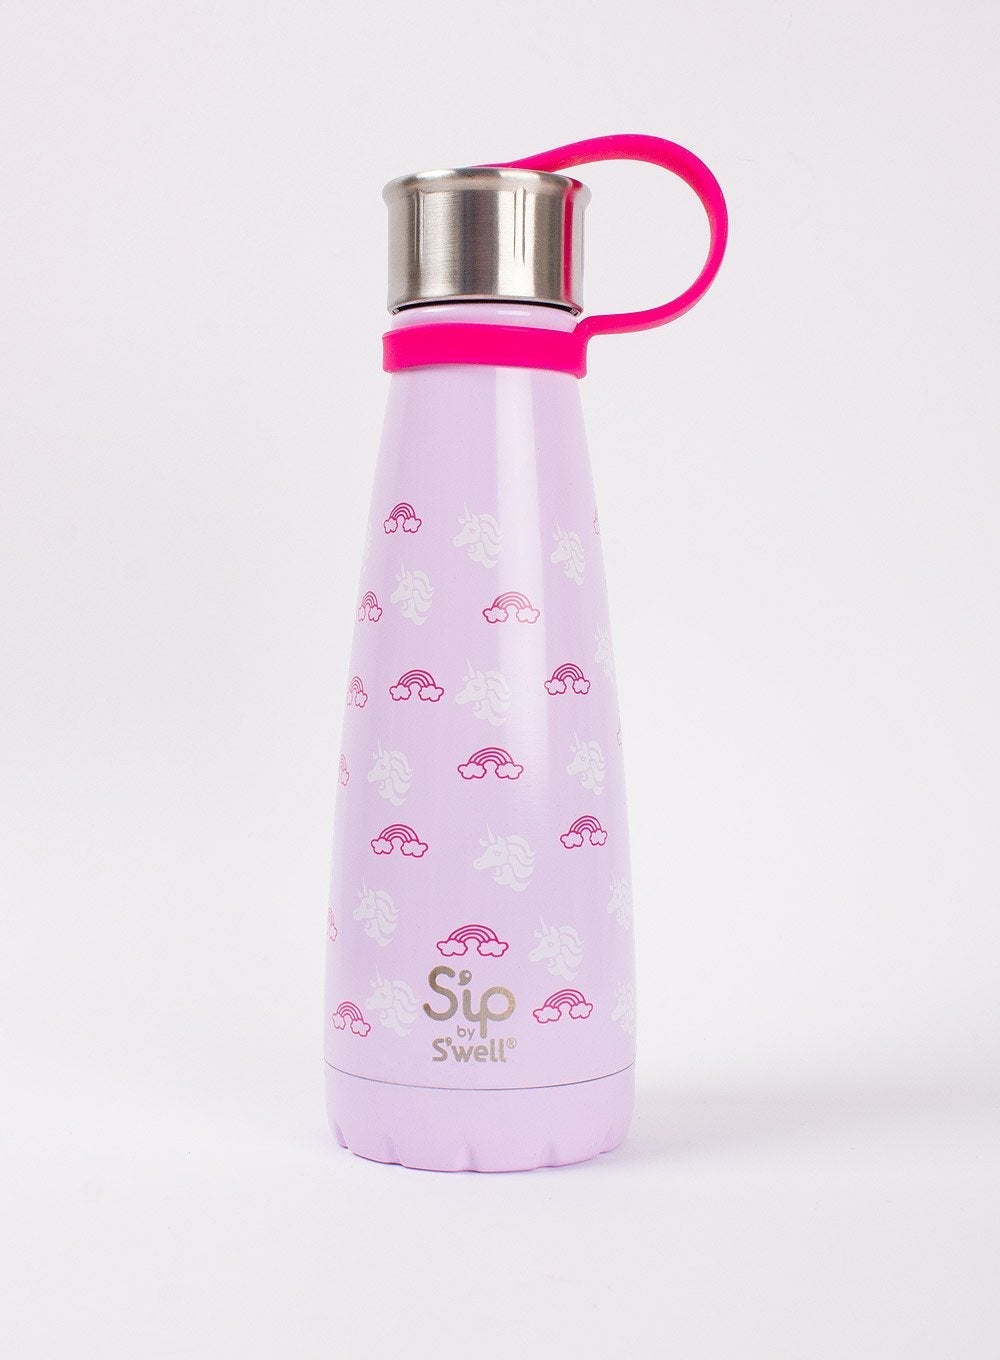 Sip by Swell Bottle Sip by Swell Insulated Water Bottle in Unicorn Dream